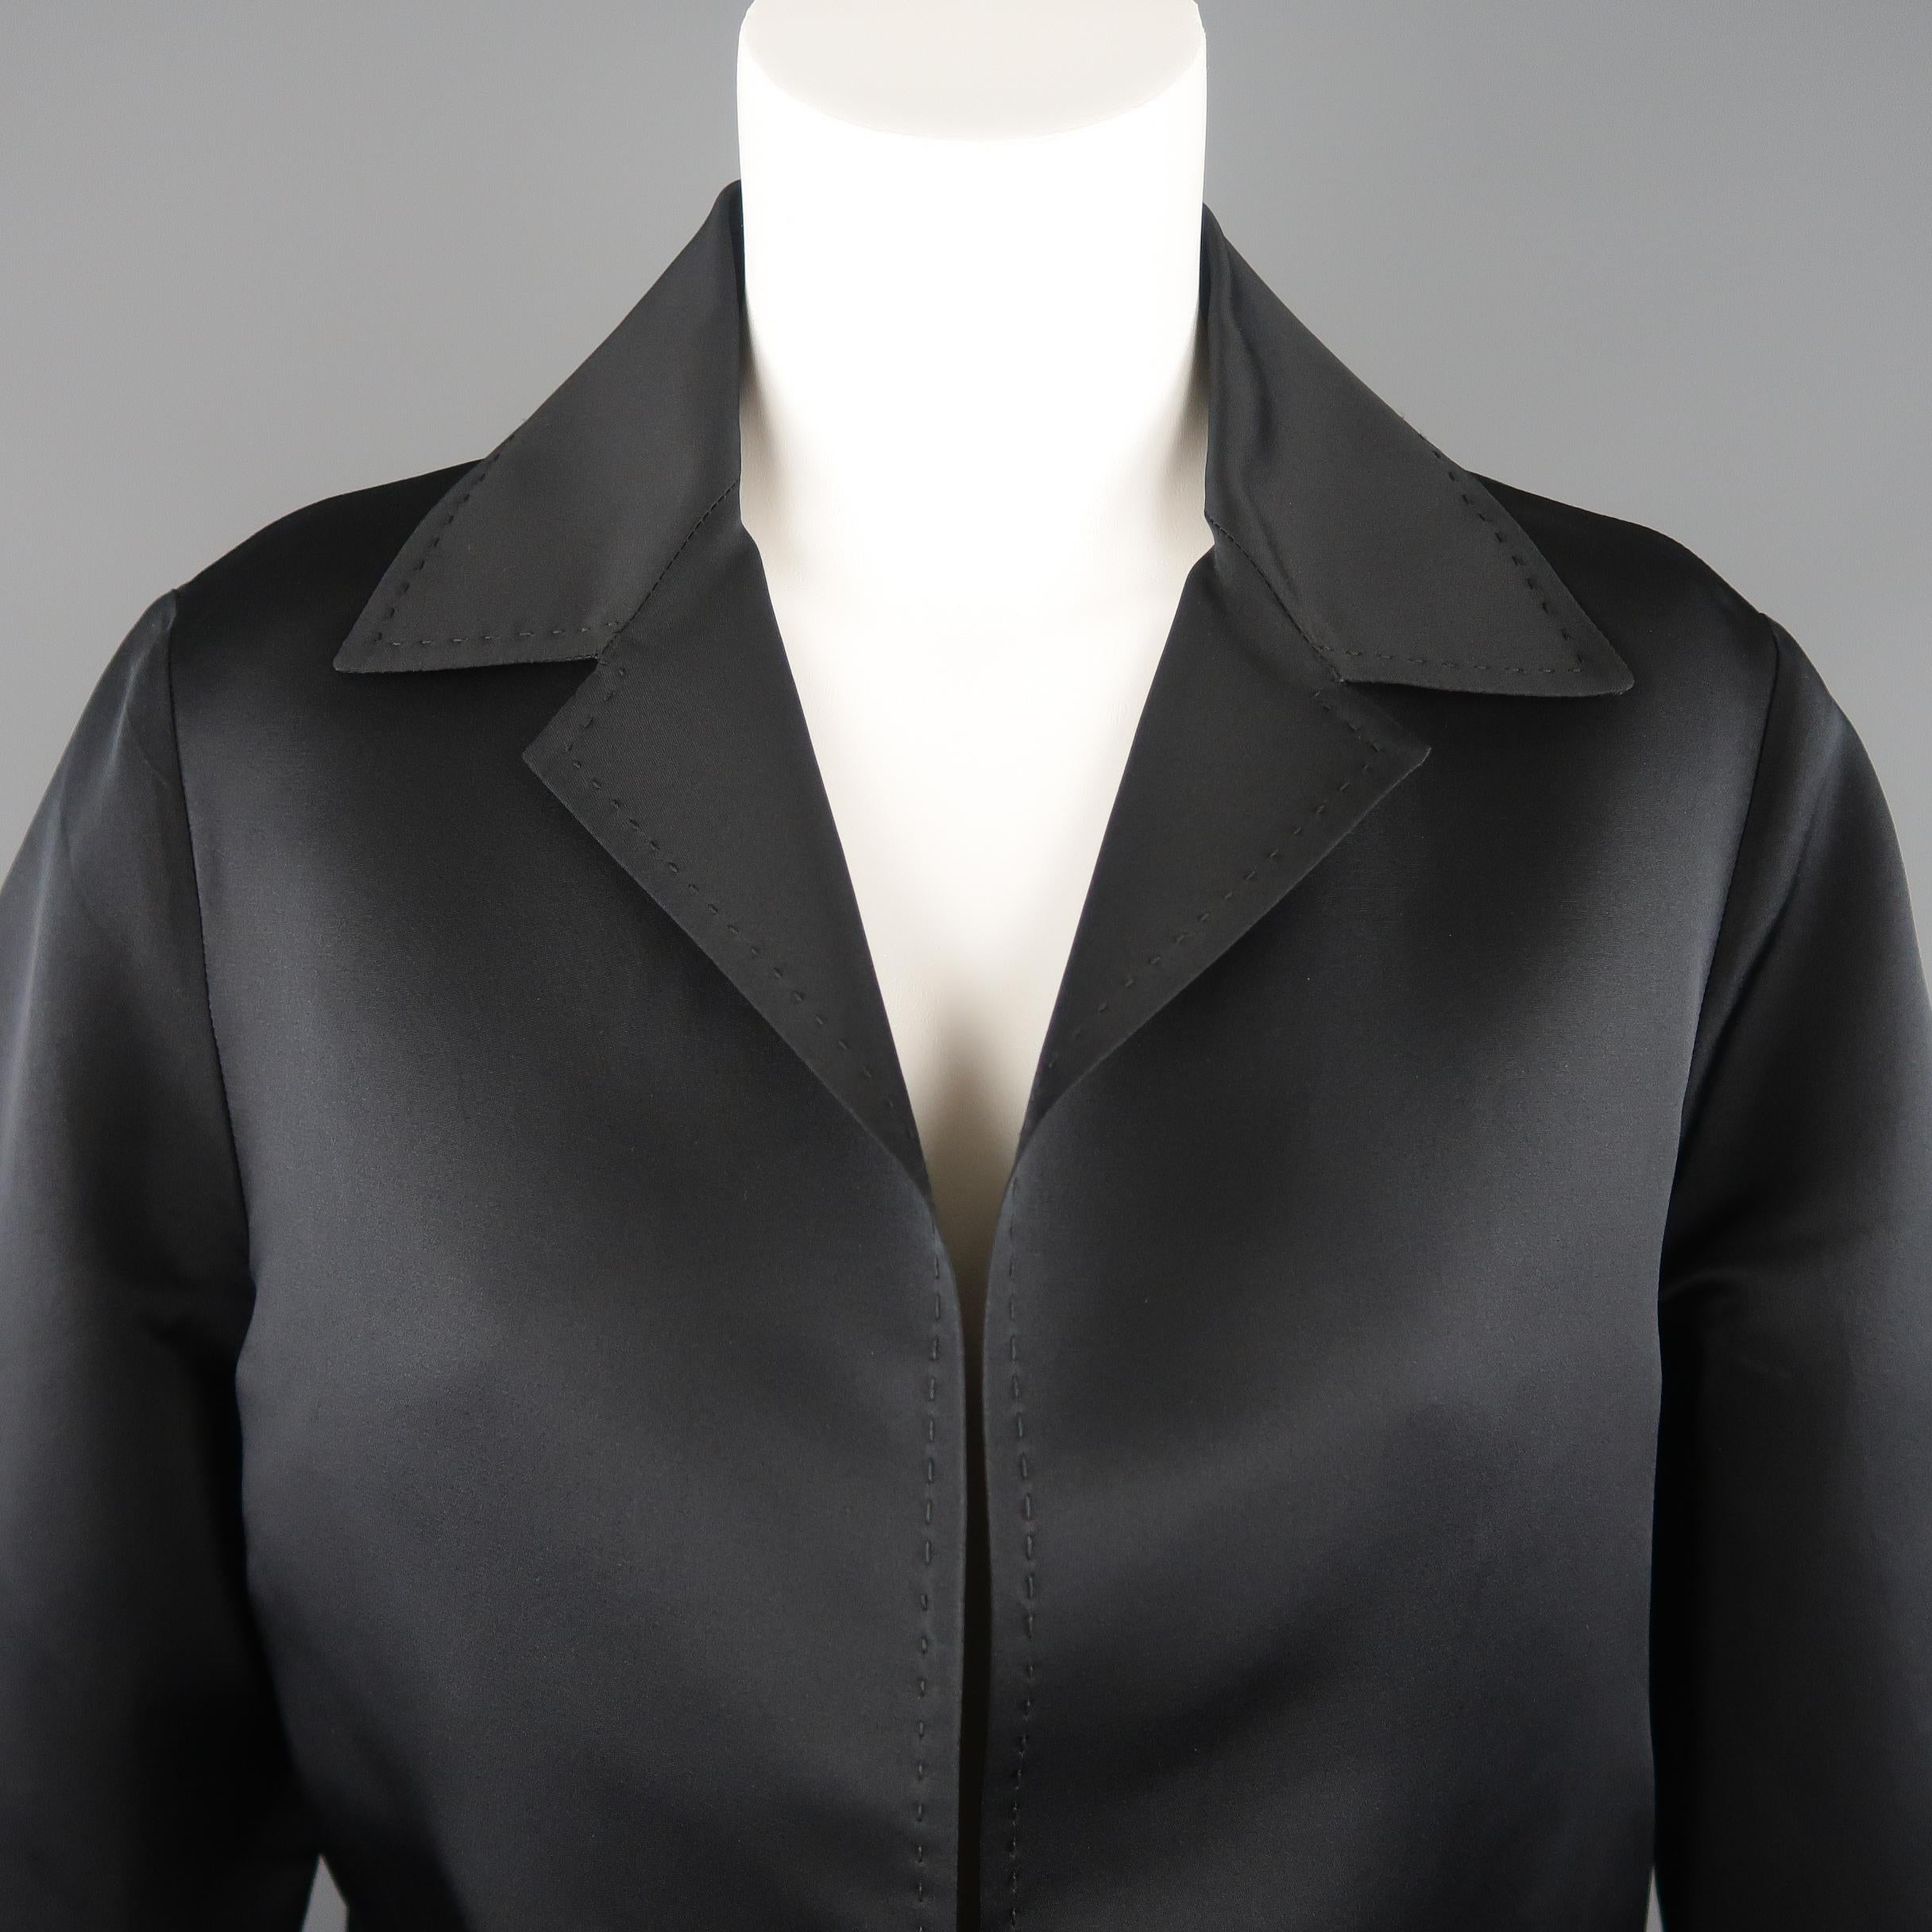 DUSAN jacket comes in black silk satin with a pointed collar, slanted pockets, open front, and top stitching throughout. Made in Italy.
 
Excellent Pre-Owned Condition.
Marked: M
 
Measurements:
 
Shoulder: 16 in.
Bust: 46 in.
Sleeve: 24 in.
Length: